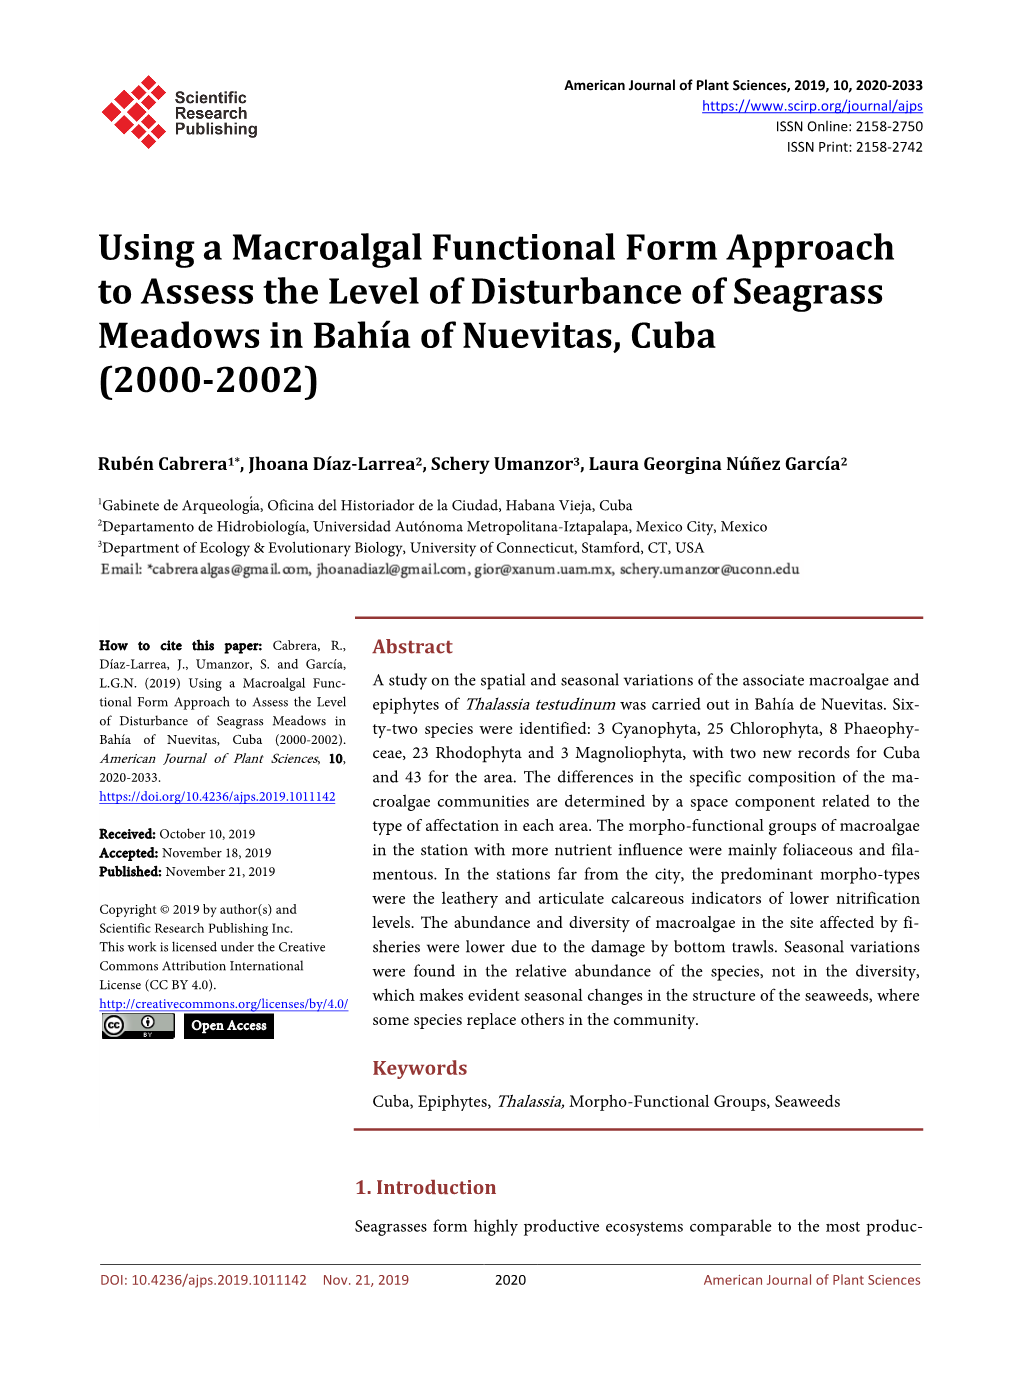 Using a Macroalgal Functional Form Approach to Assess the Level of Disturbance of Seagrass Meadows in Bahía of Nuevitas, Cuba (2000-2002)